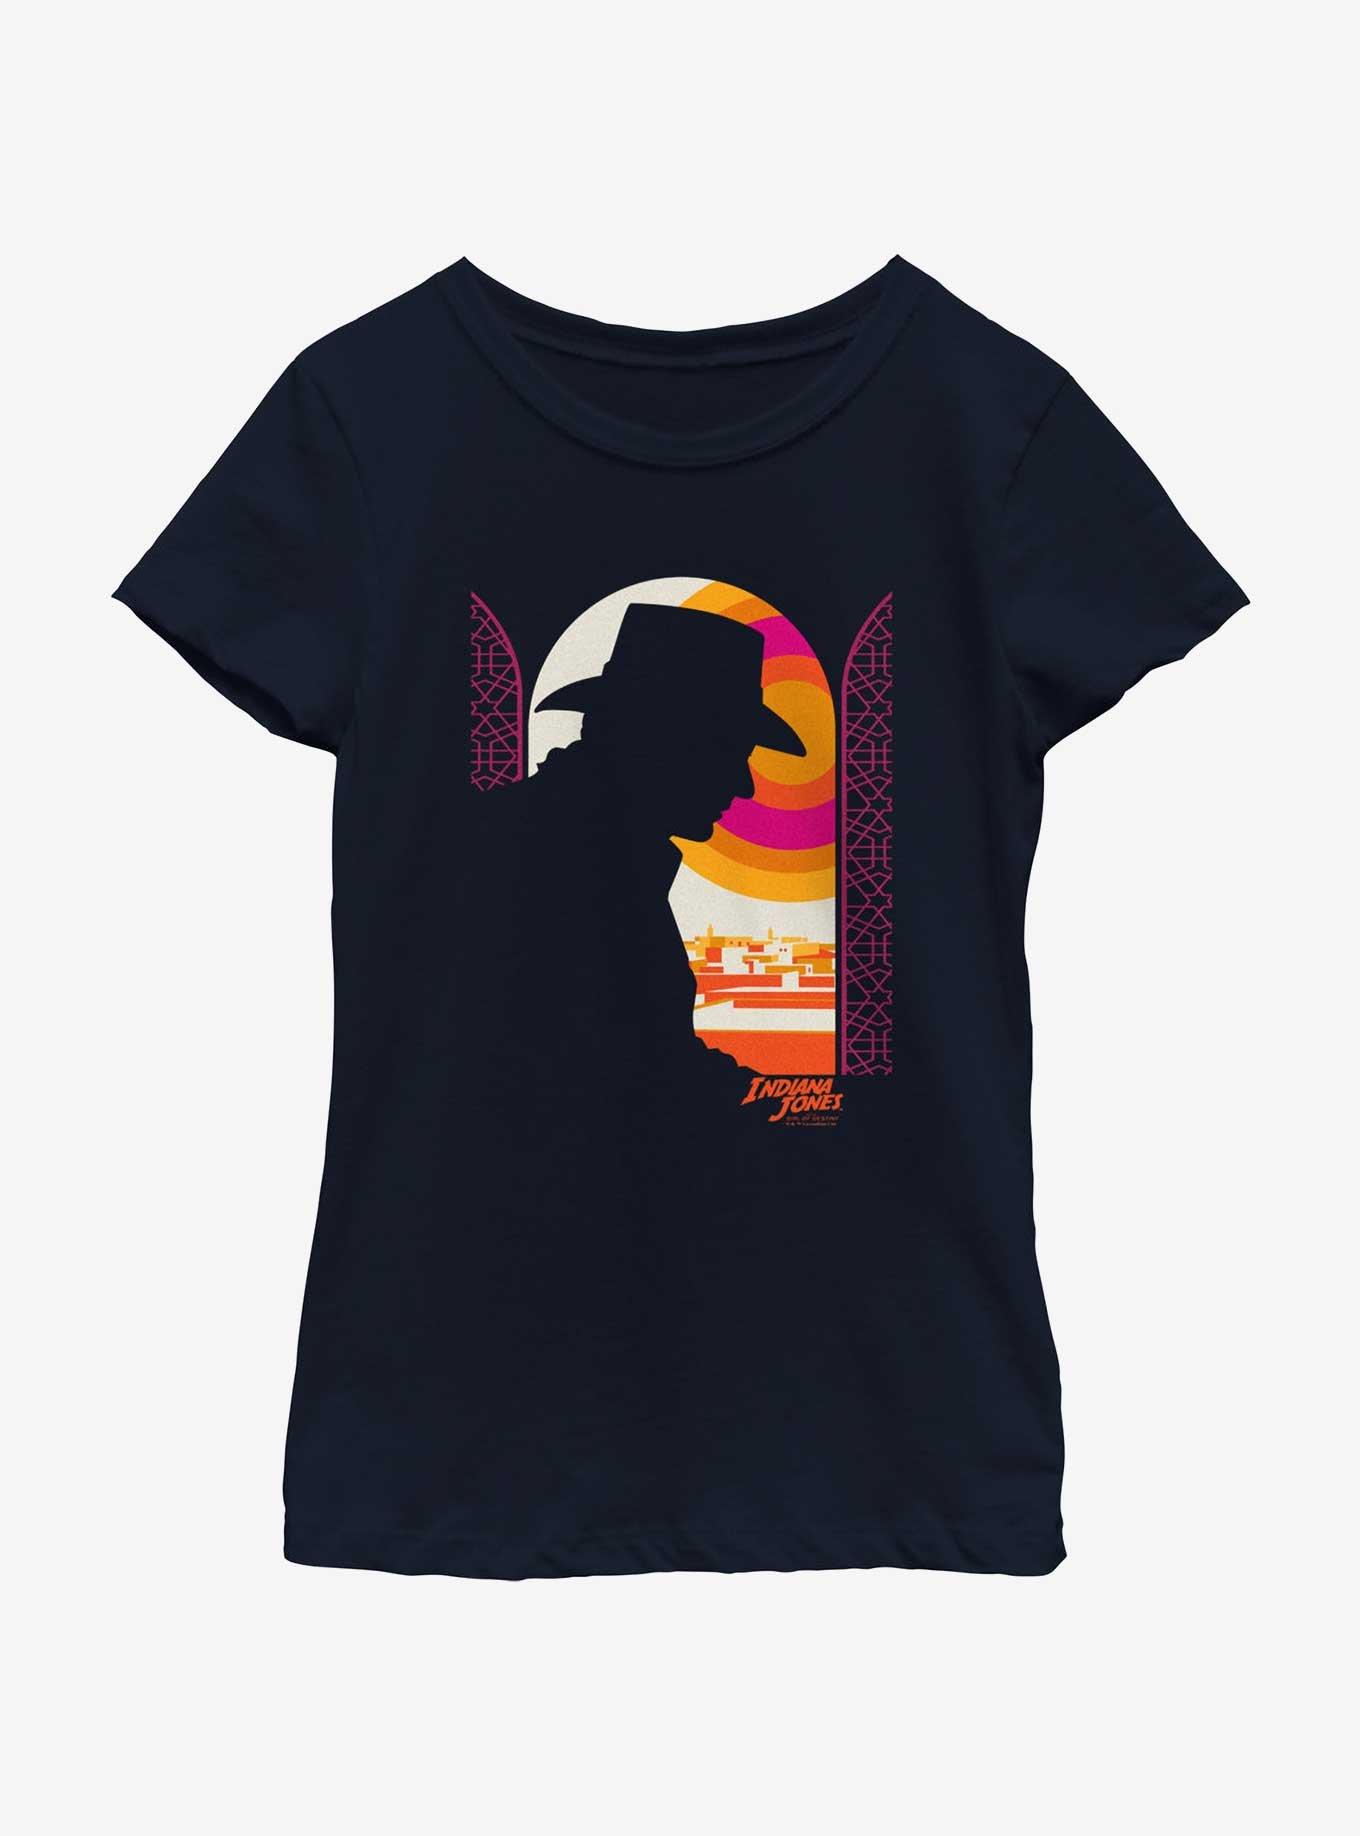 Indiana Jones and the Dial of Destiny Window To Jones Girls Youth T-Shirt, NAVY, hi-res